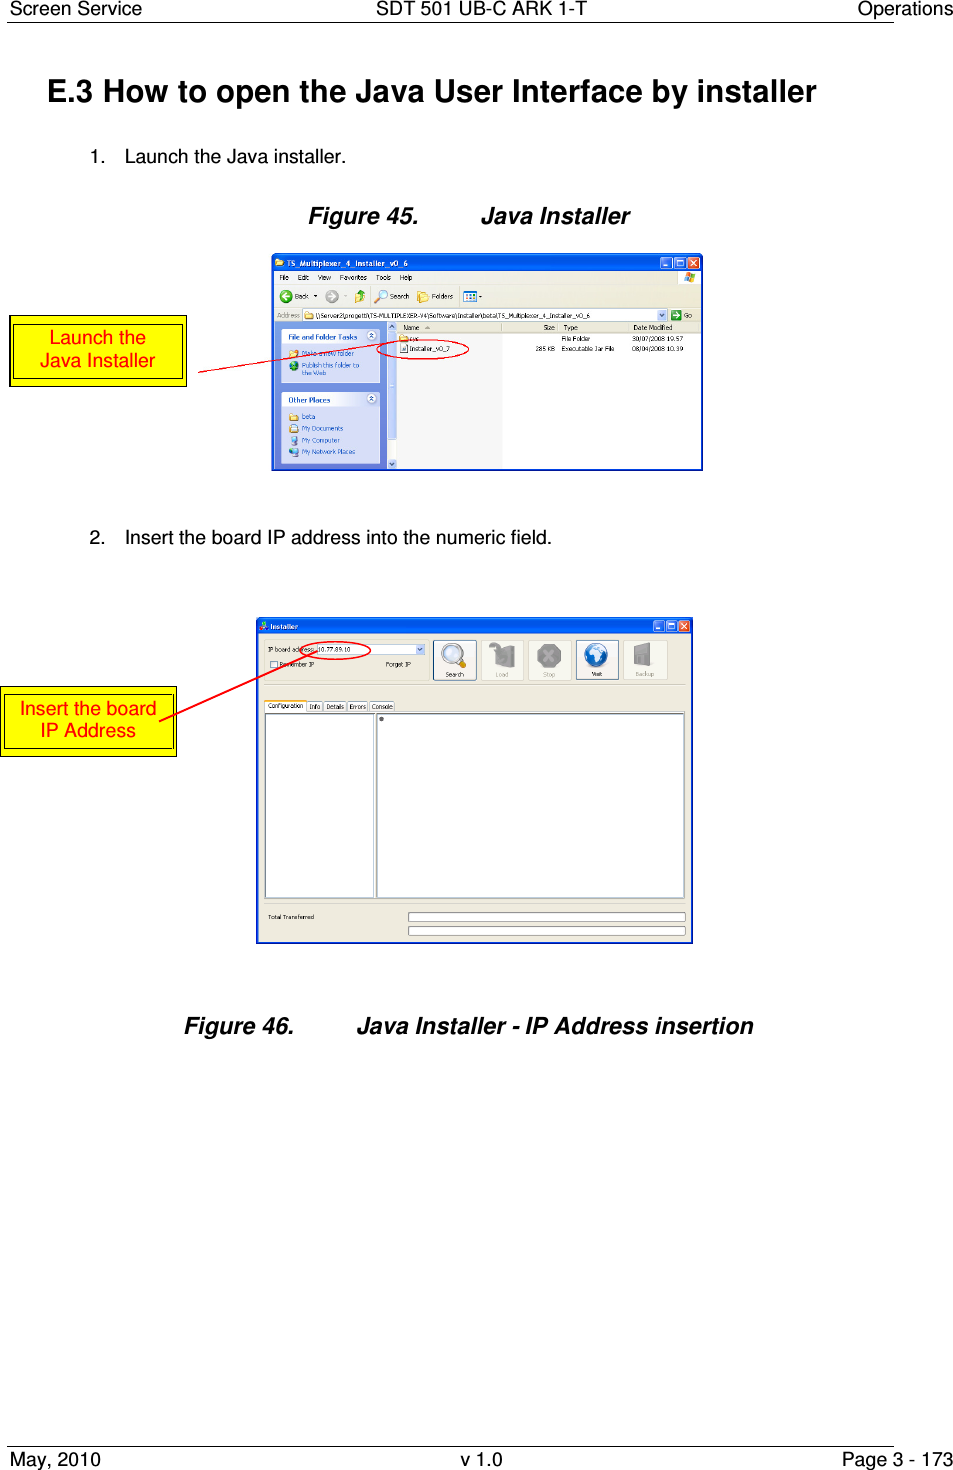 Screen Service  SDT 501 UB-C ARK 1-T  Operations May, 2010  v 1.0  Page 3 - 173 E.3 How to open the Java User Interface by installer 1.  Launch the Java installer. Figure 45.  Java Installer   2.  Insert the board IP address into the numeric field. Figure 46.  Java Installer - IP Address insertion                Insert the board IP Address Launch the Java Installer 